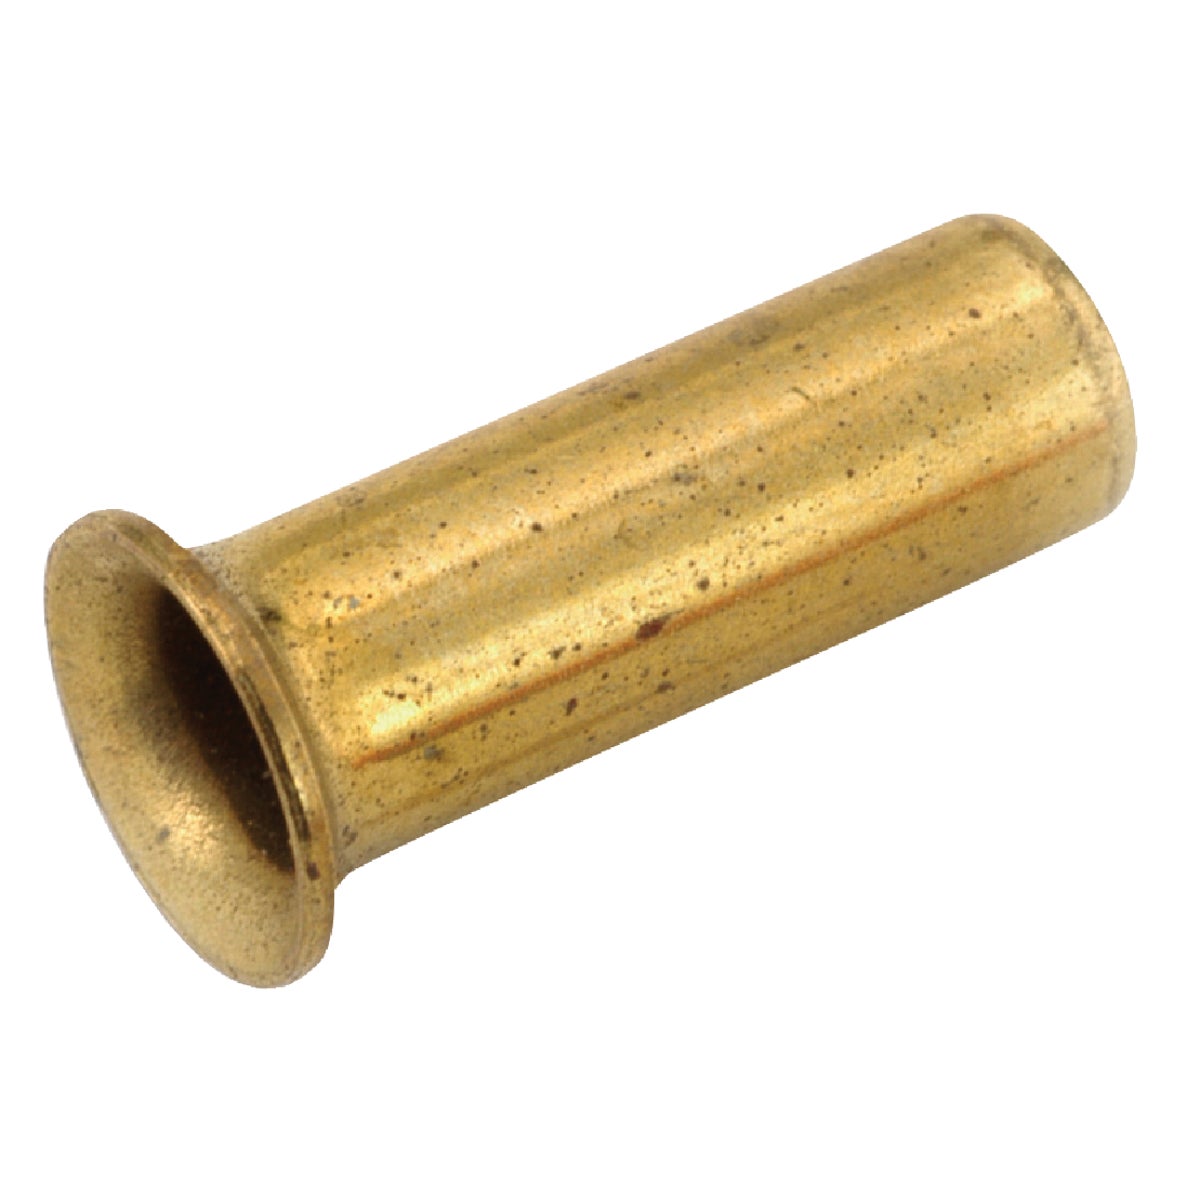 Anderson Metals 5/16 In. Brass Compression Insert (5-Pack)